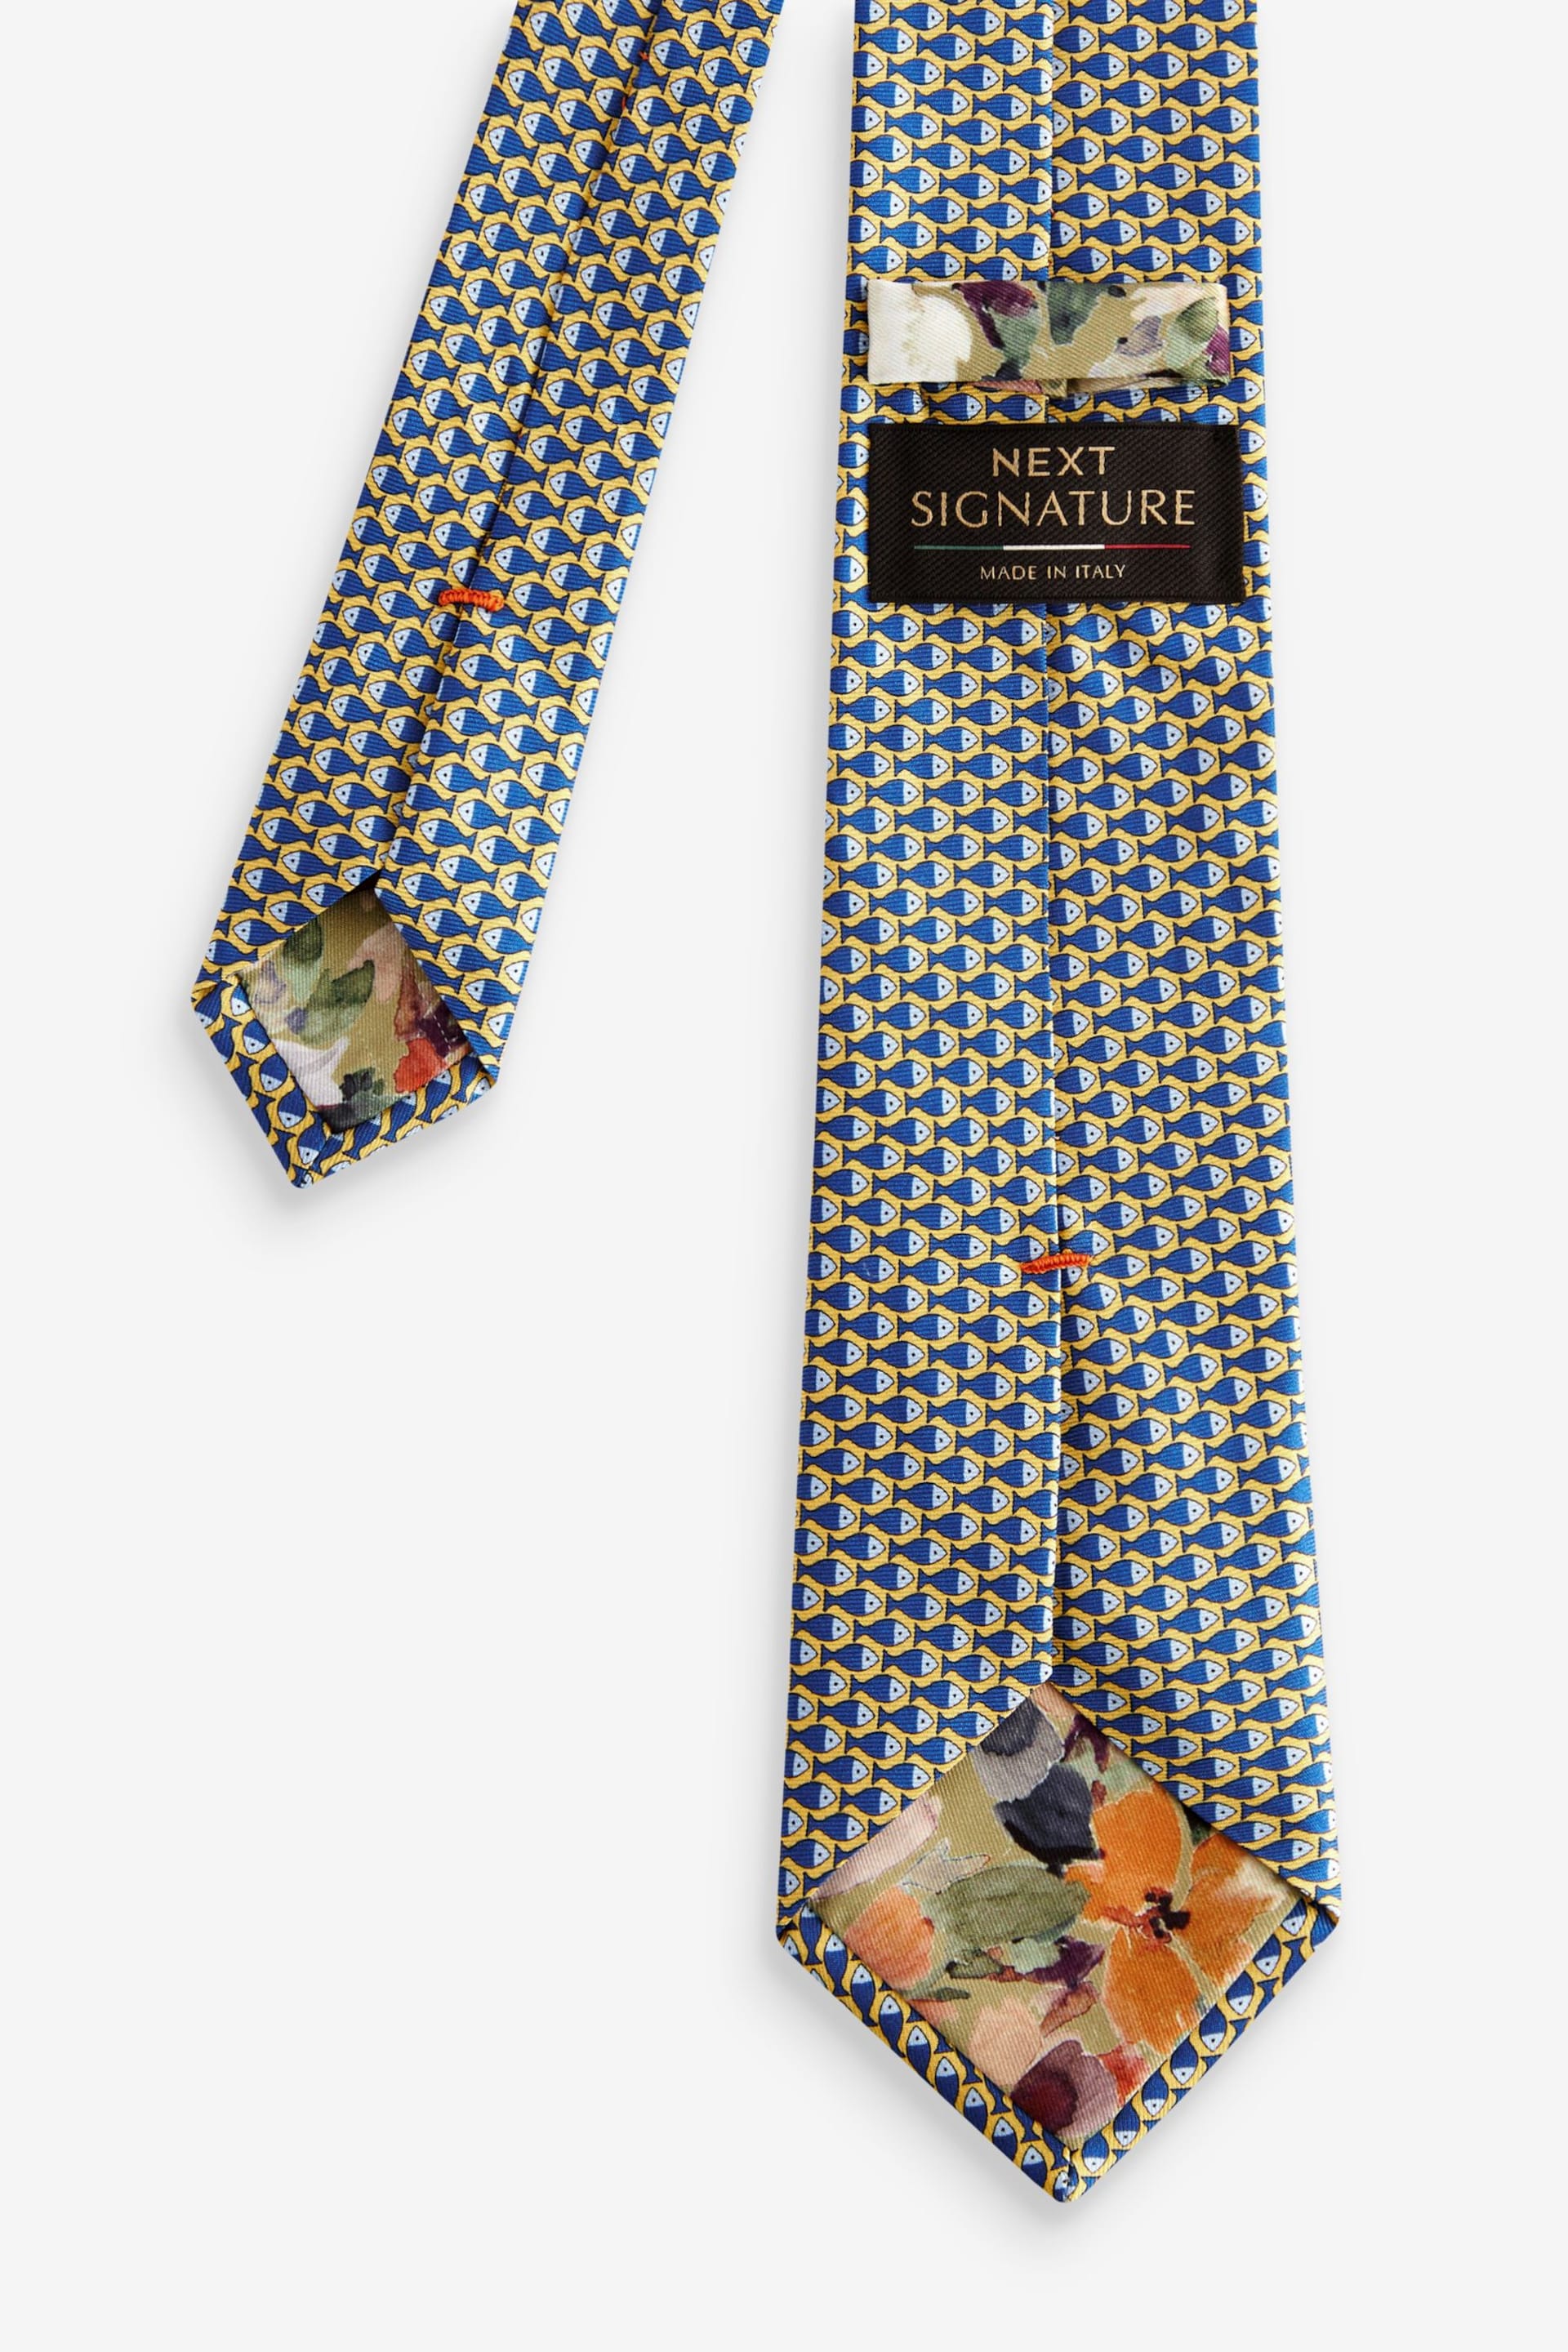 Yellow/Blue Fish Signature Made In Italy Conversational Tie - Image 3 of 4